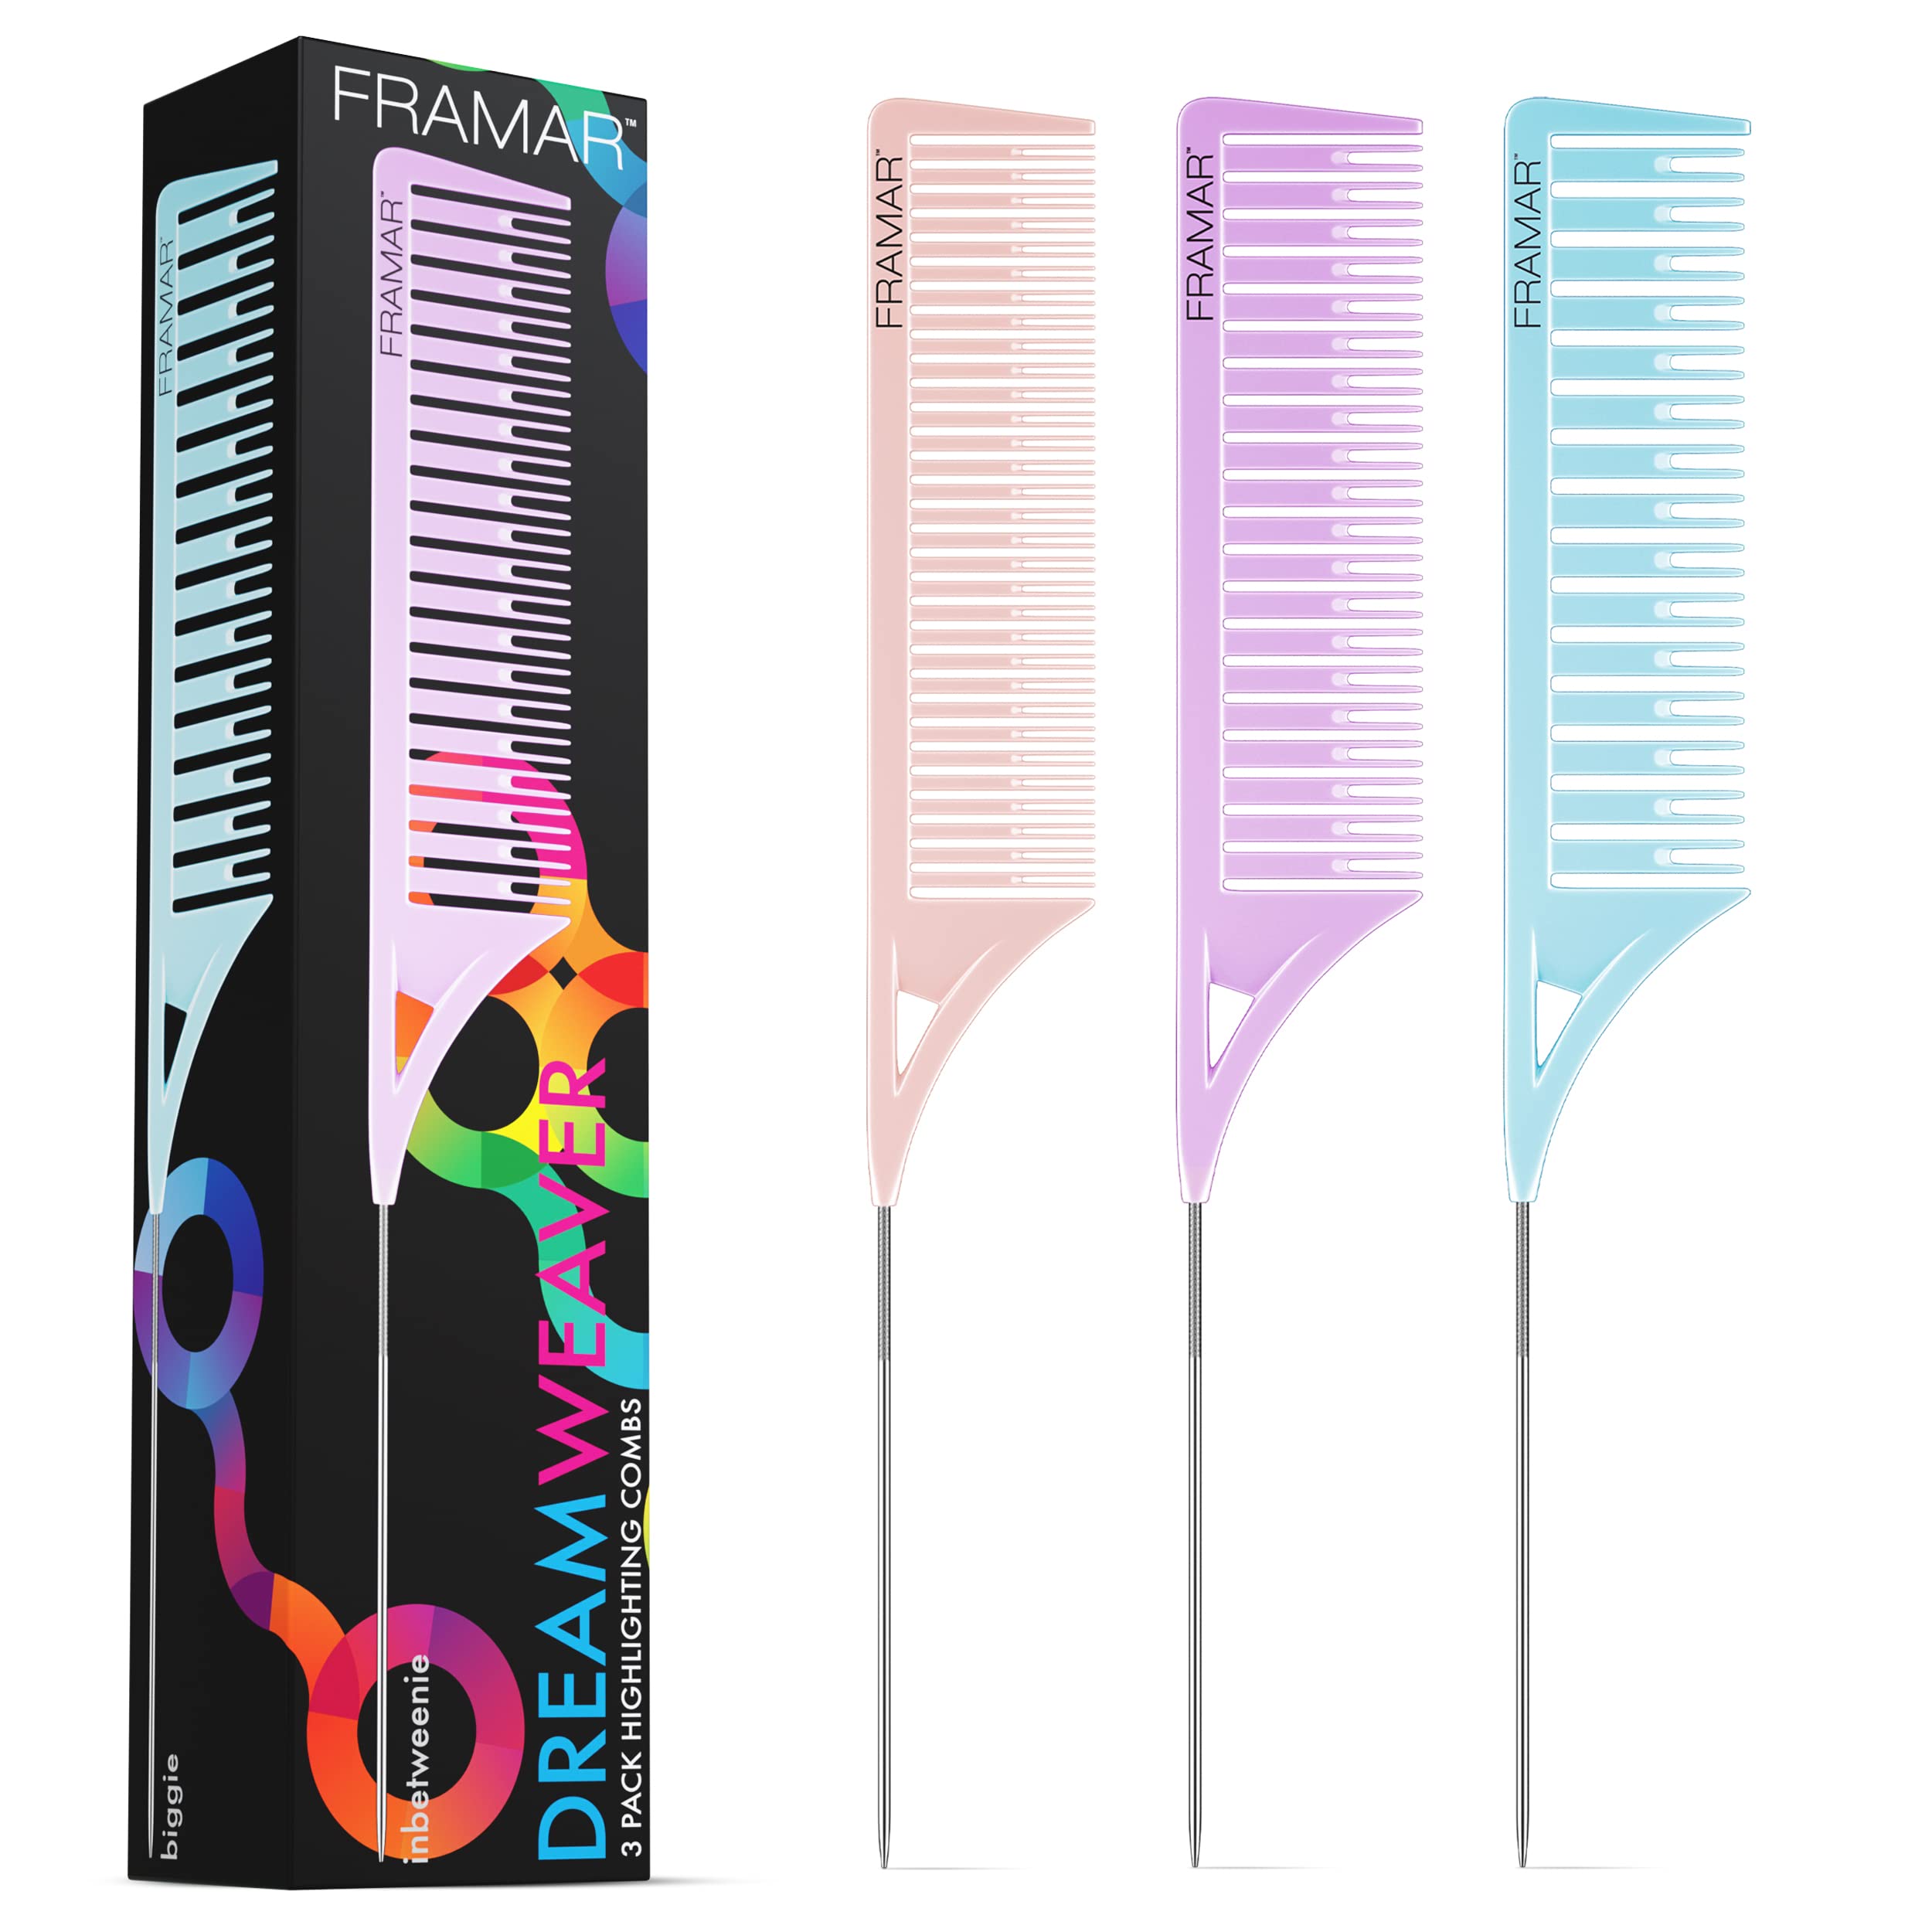 Framar Dreamweaver Highlight Comb Set Combs for Hair Stylist, Highlighting  Comb, Hair Dye Comb, Hair Highlighter Comb with Metal Pick, Balayage Comb ( Pastel)